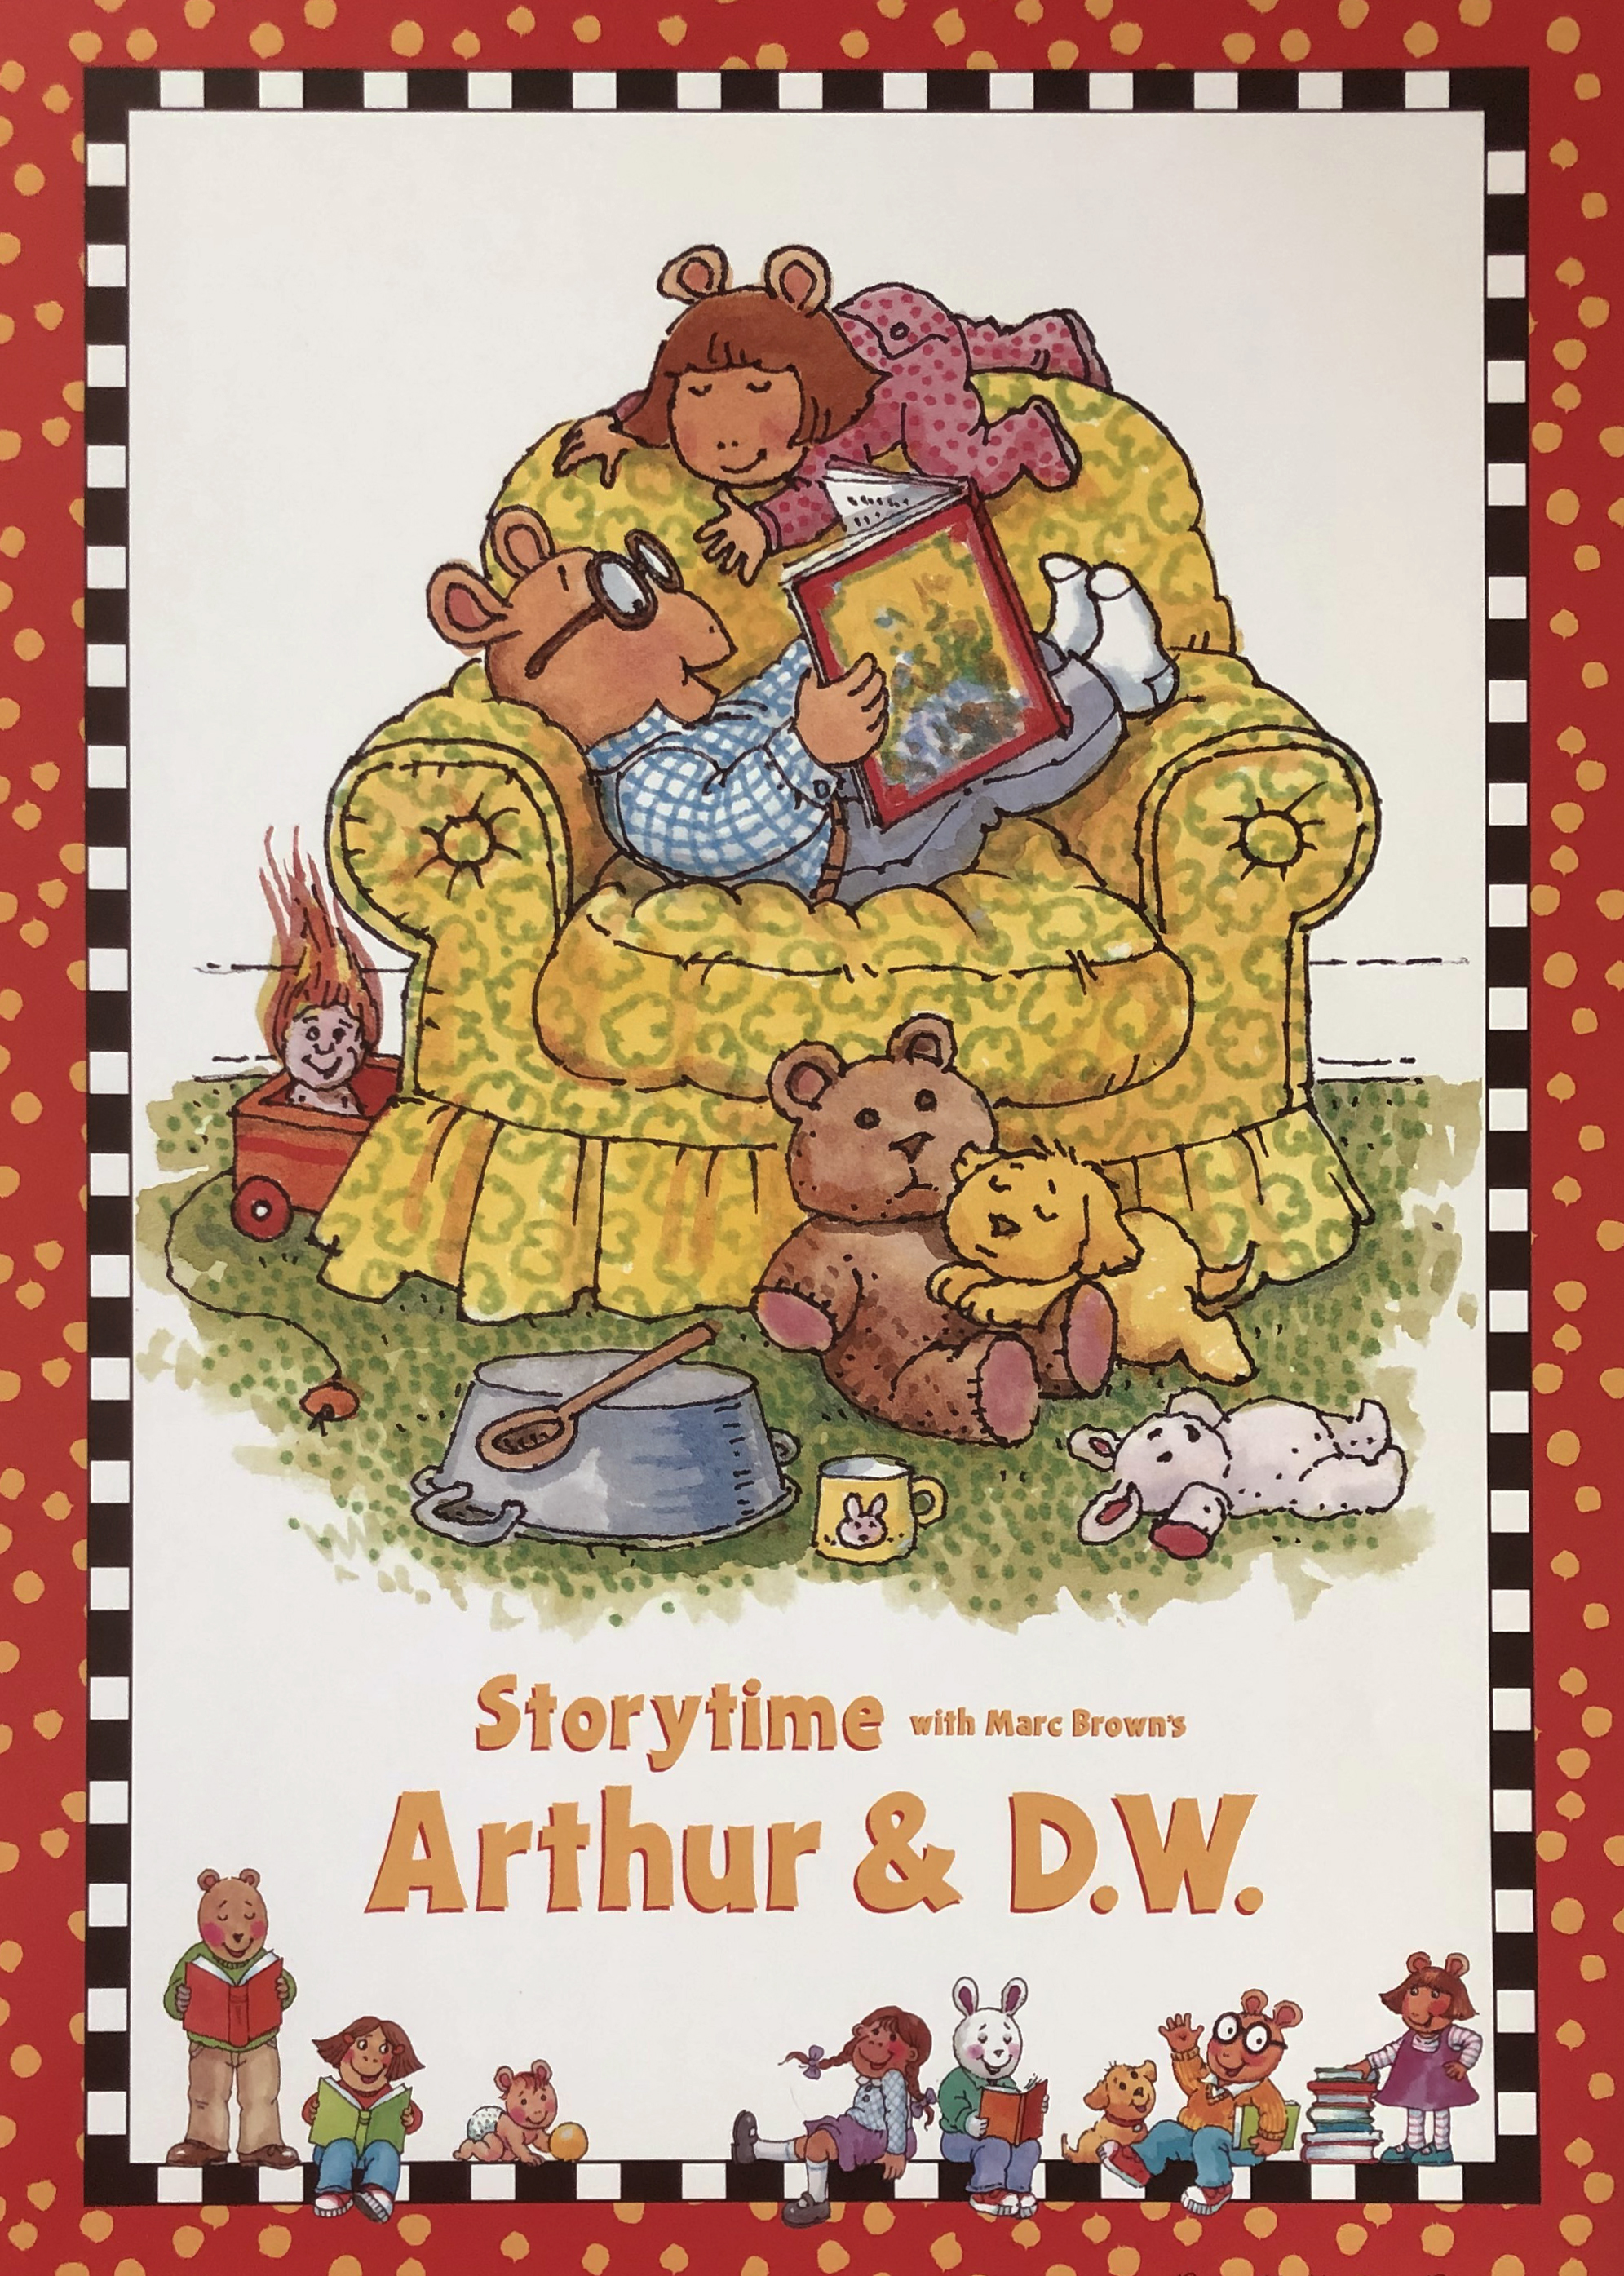 Storytime with Arthur & D.W.